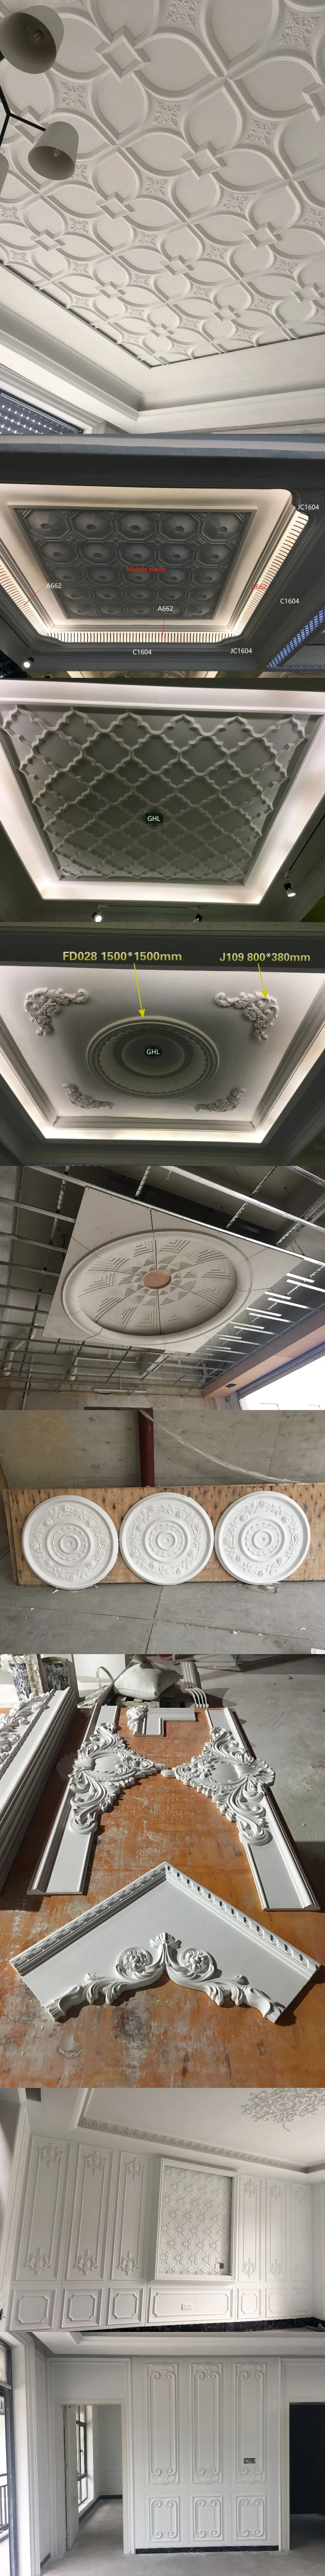 Top Glassfiber Reinforced Plastic/ Resin ceiling Cornice Mould